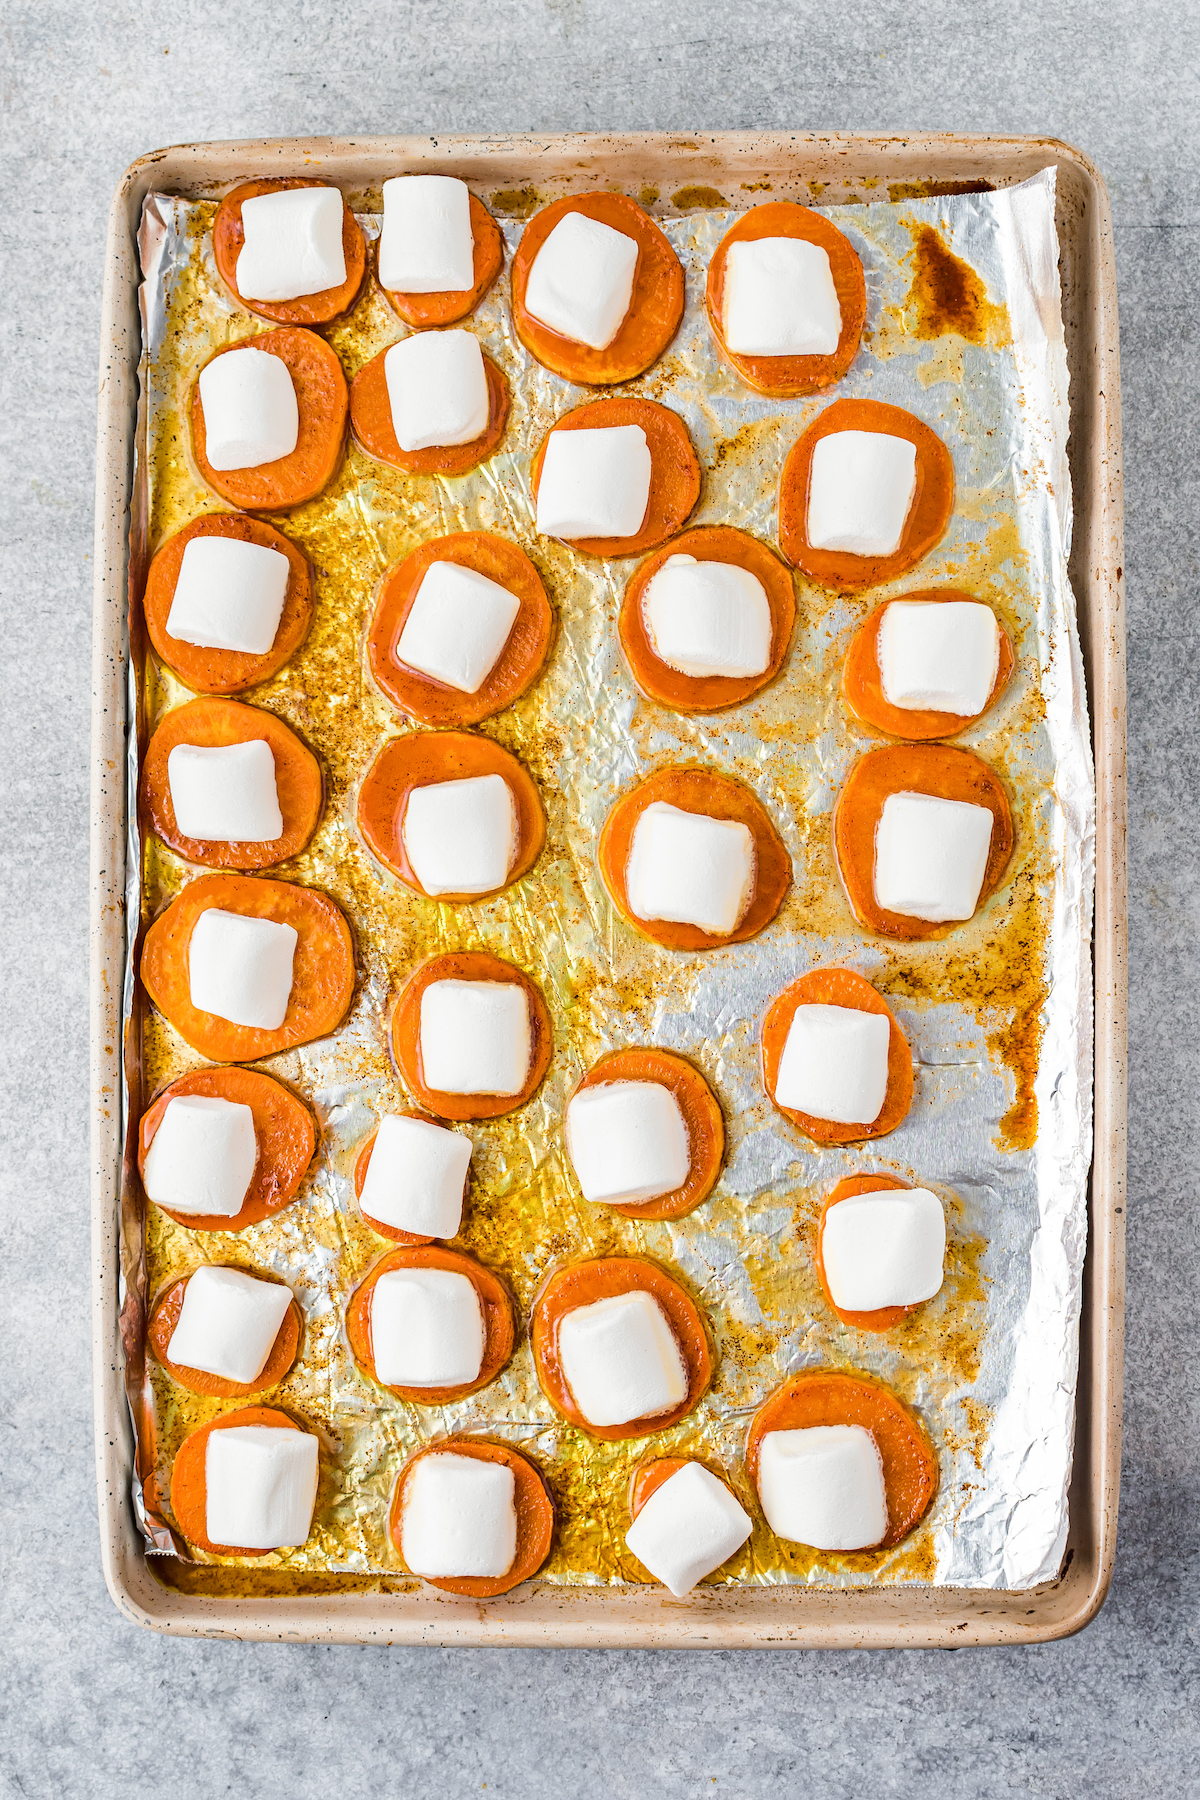 Baked sweet potato bites with marshmallows on top, before melting.